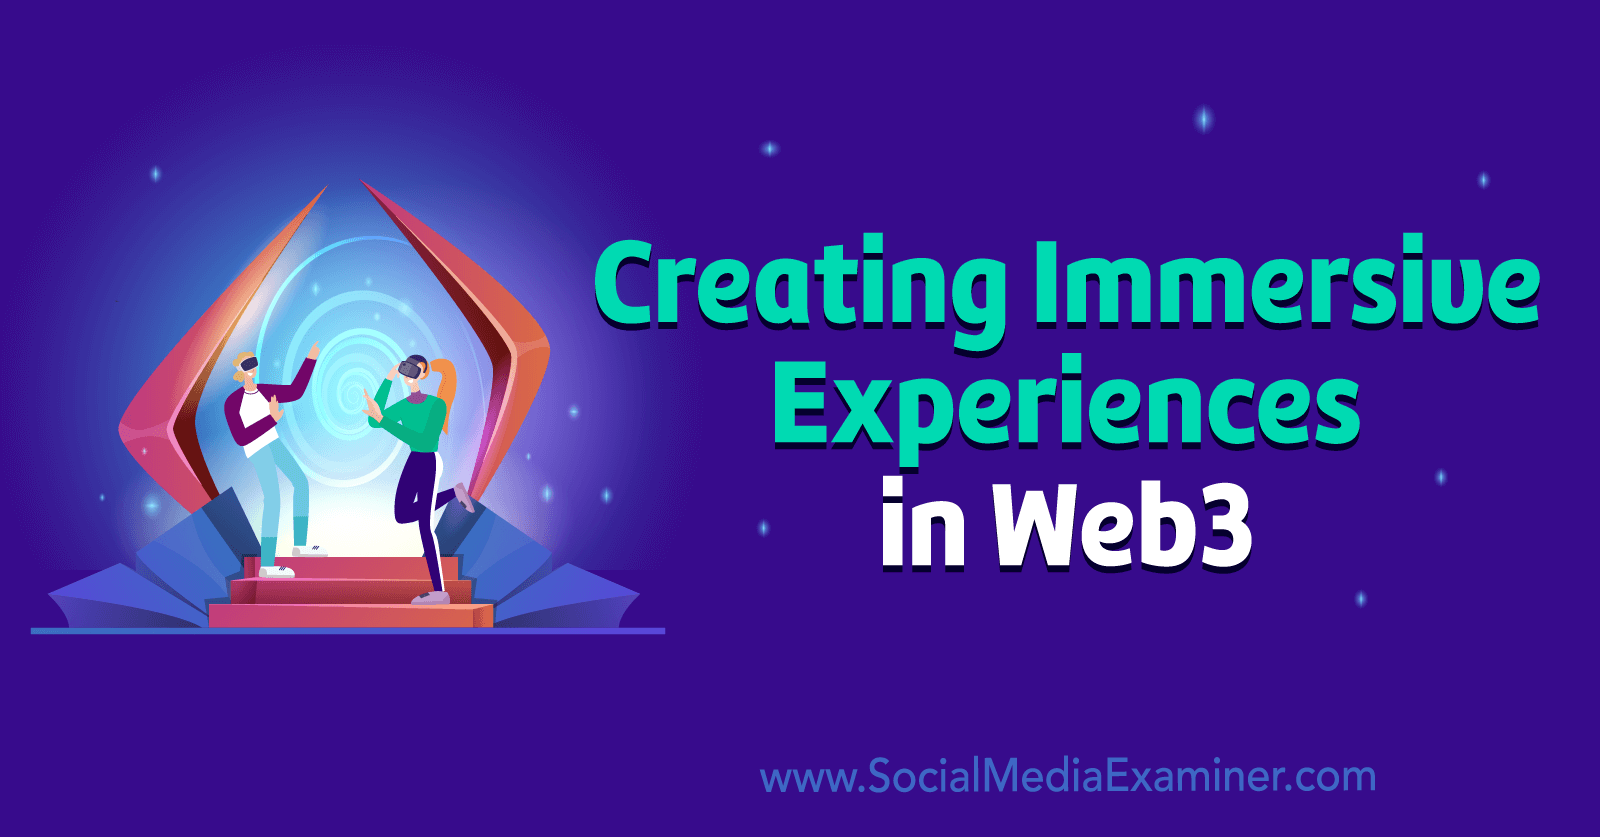 Creating Immersive Experiences in Web3 by Social Media Examiner